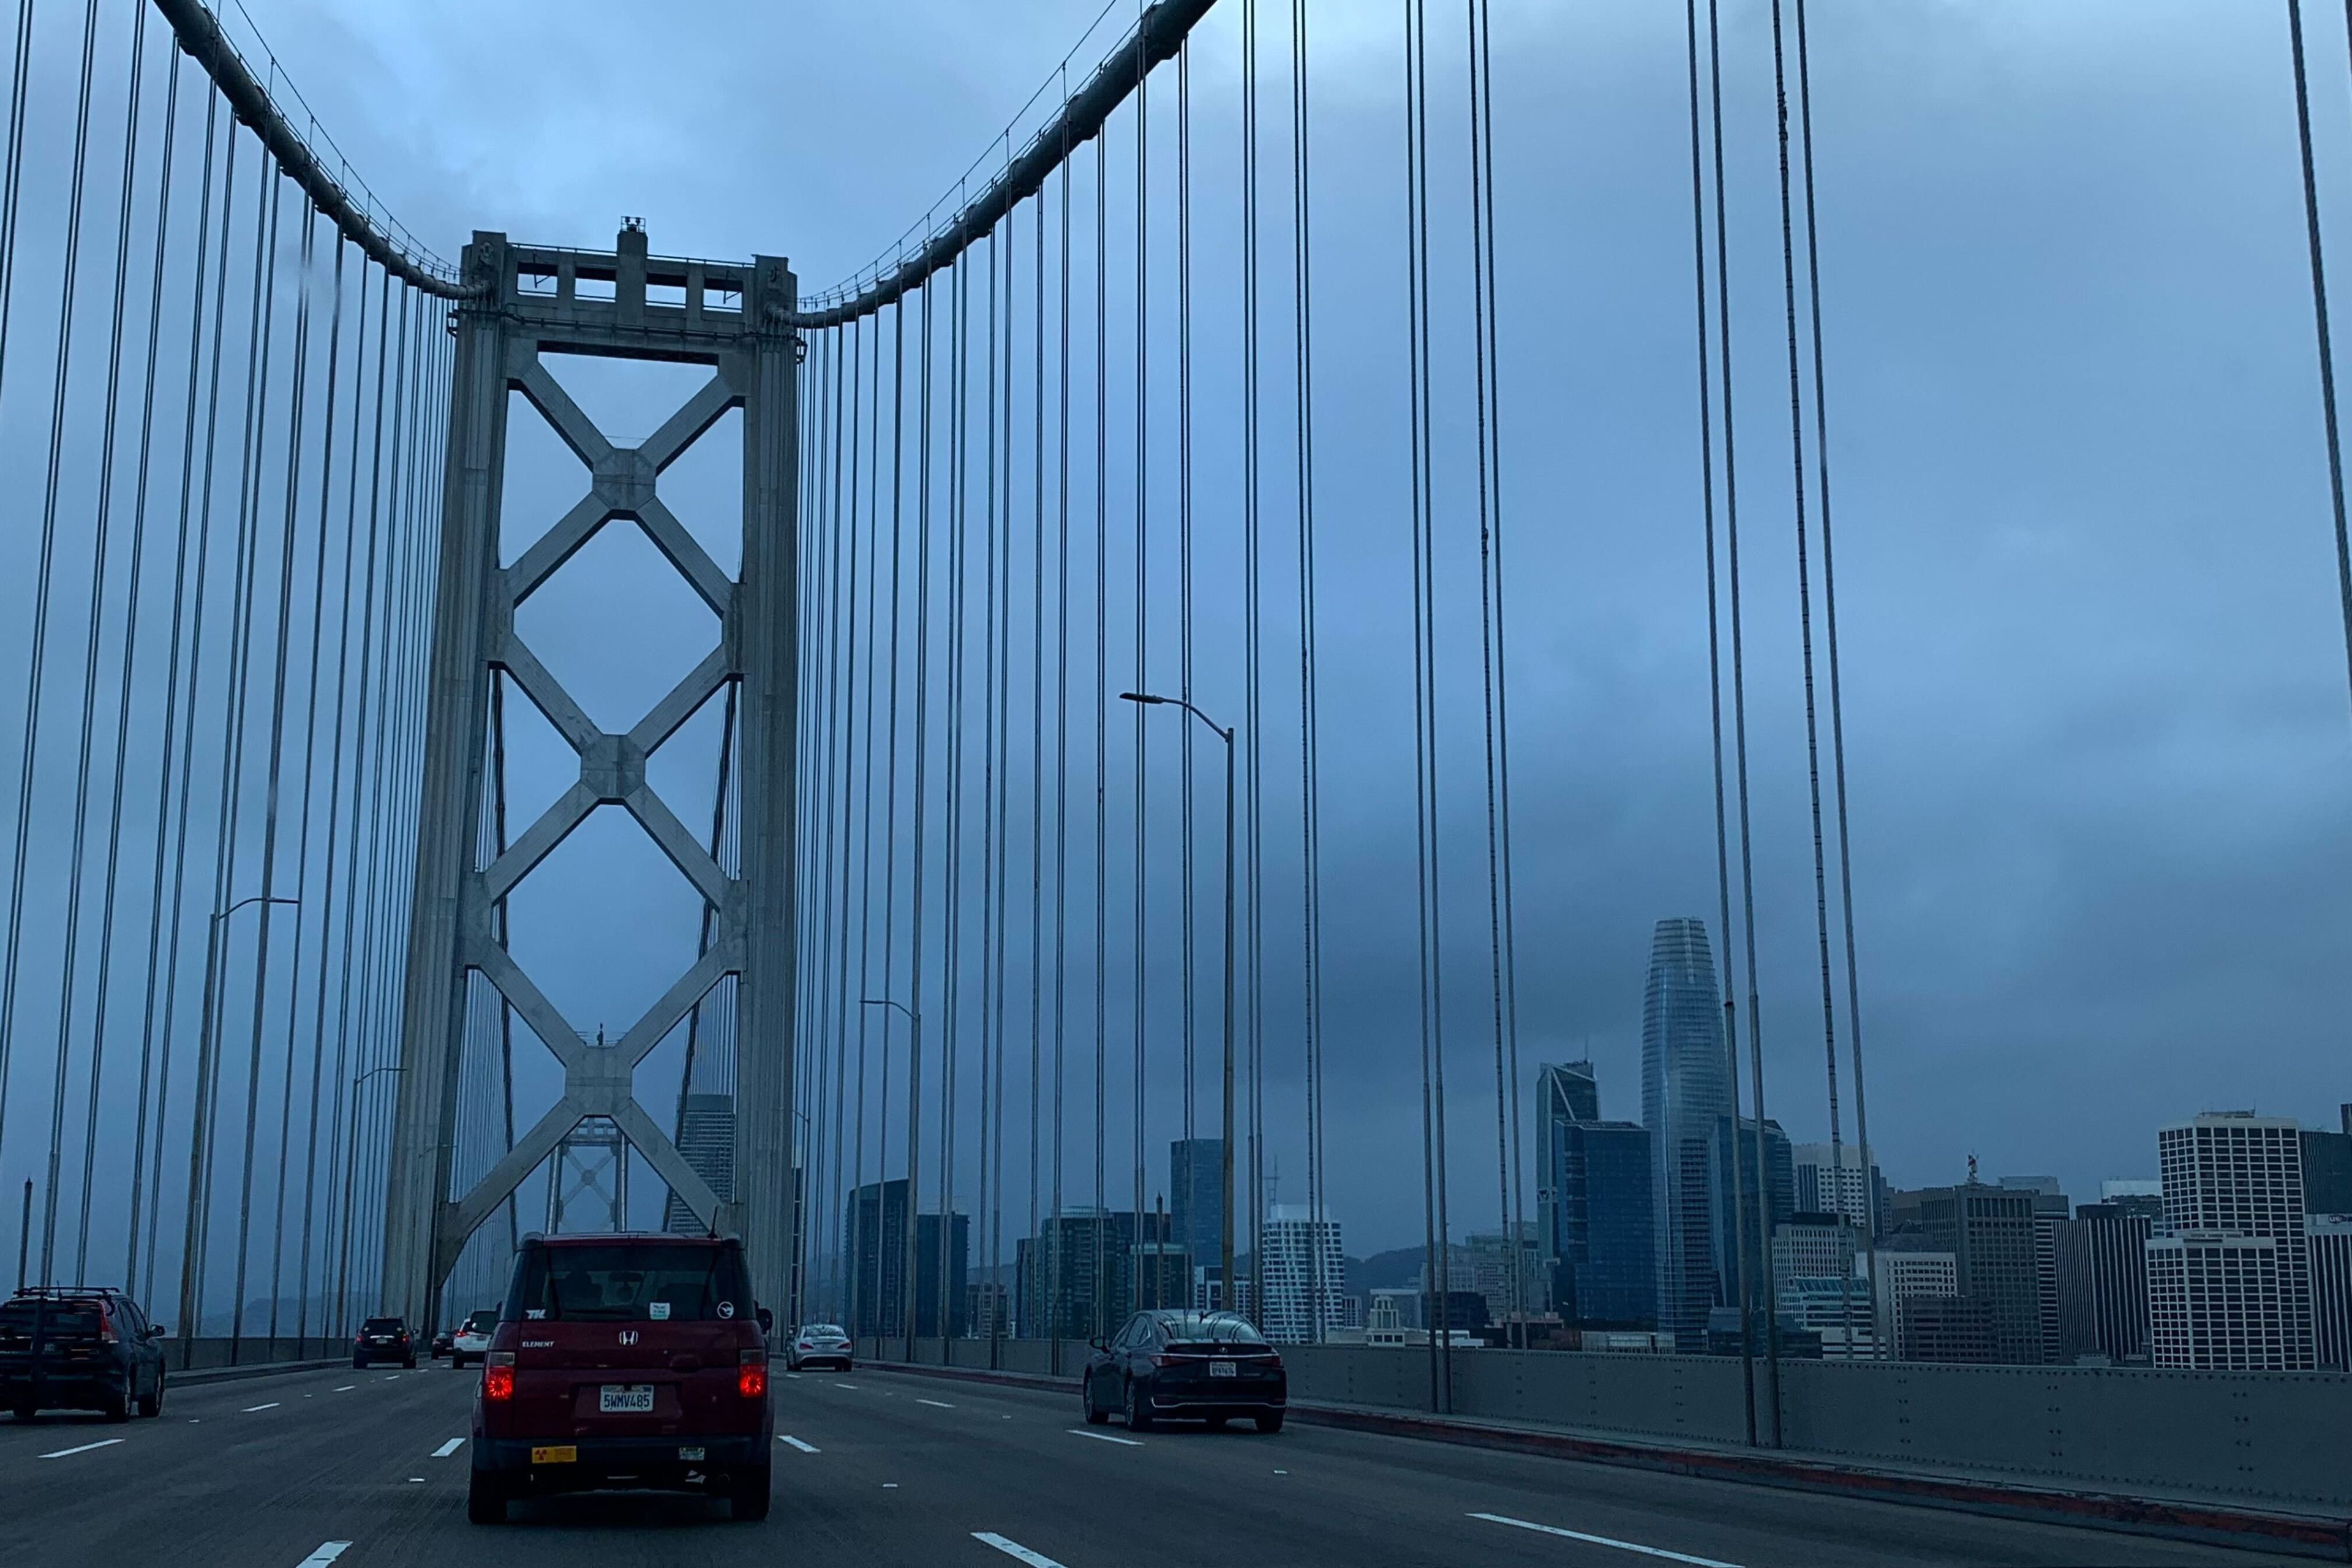 A city skyline is visible from a suspension bridge's traffic lanes under cloudy skies.